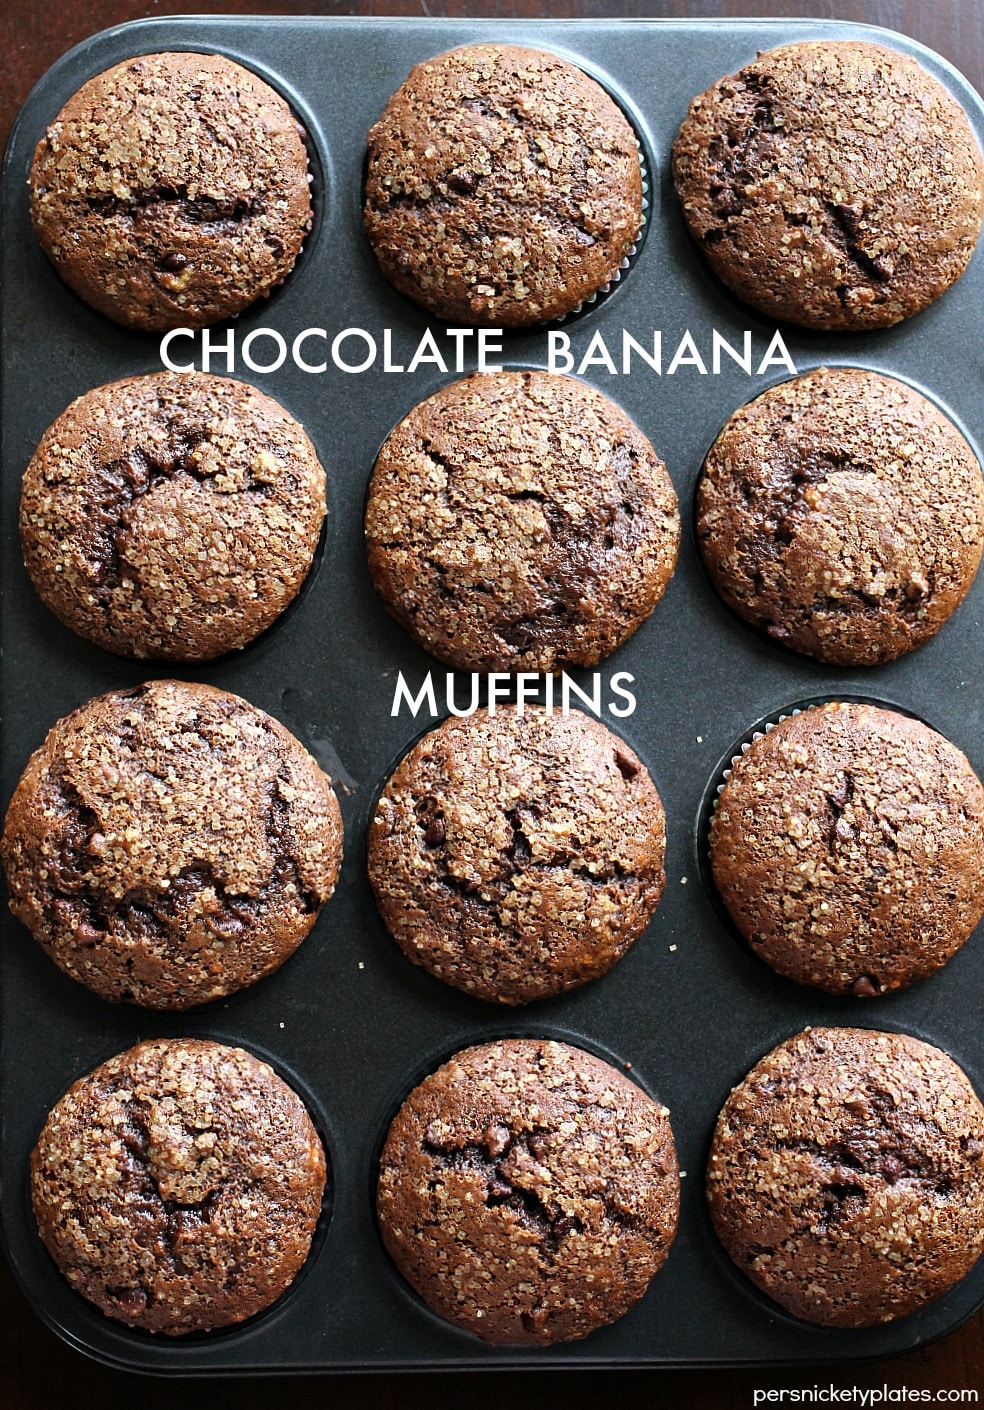 Chocolate Banana Muffins - chocolately banana muffins filled with chocolate chips & sprinkled with sugar. Homemade but you don't even have to get the mixer out! | Persnickety Plates